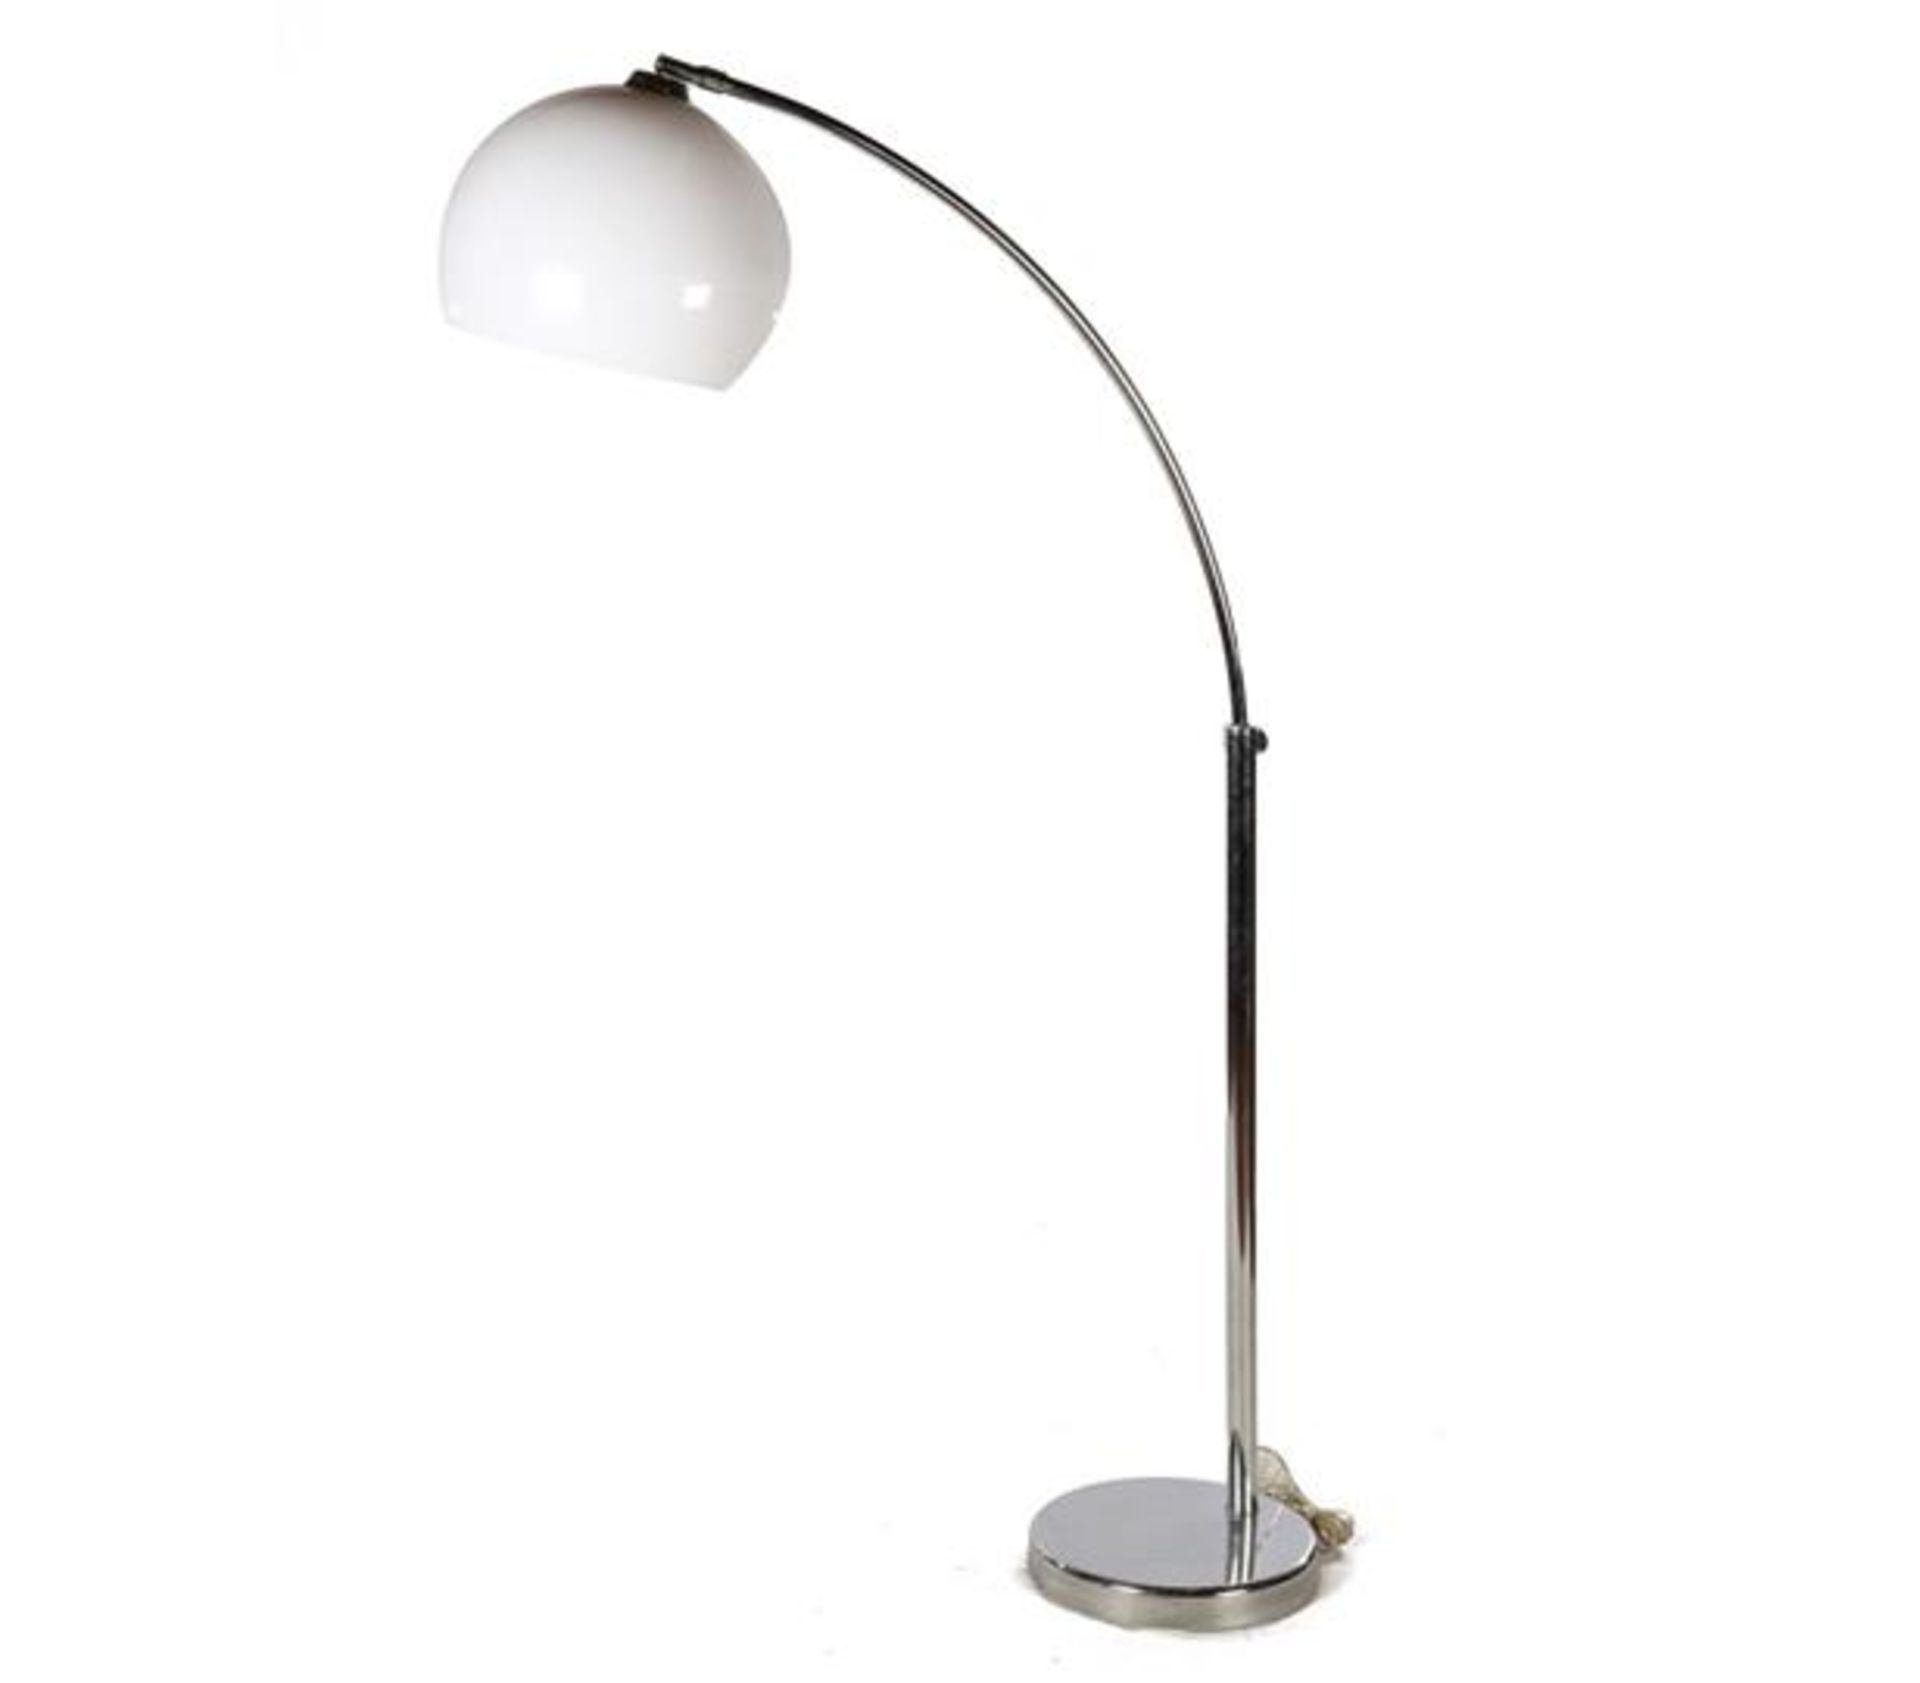 Floor lamp, chrome-plated fixture with white plastic shade, approx. 185 cm high